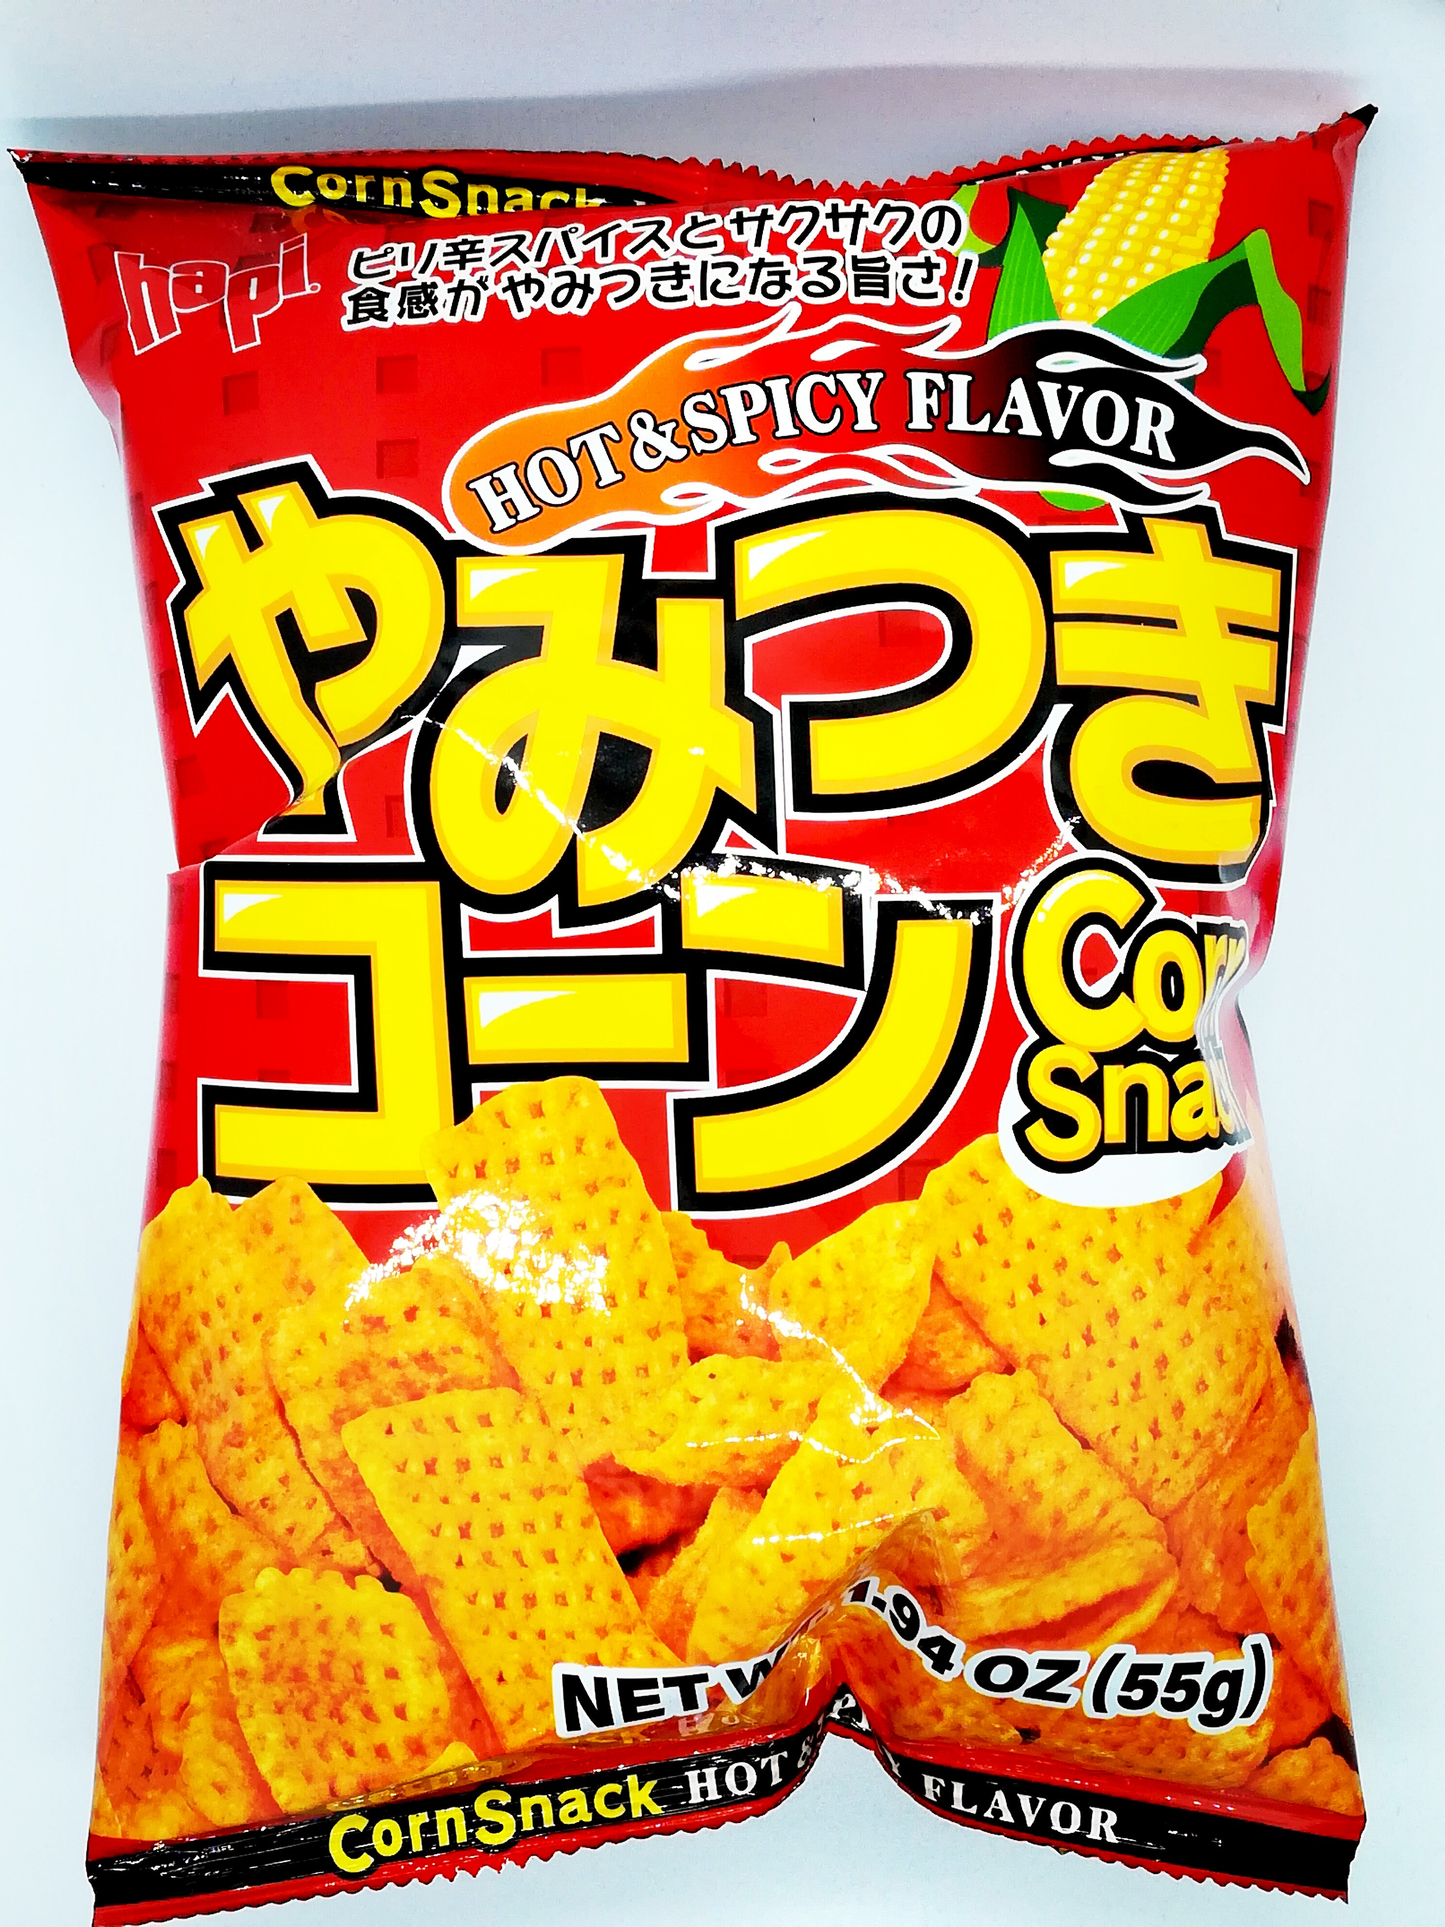 Hapi - Corn Snack - Hot & Spicy - Product Of Taiwan